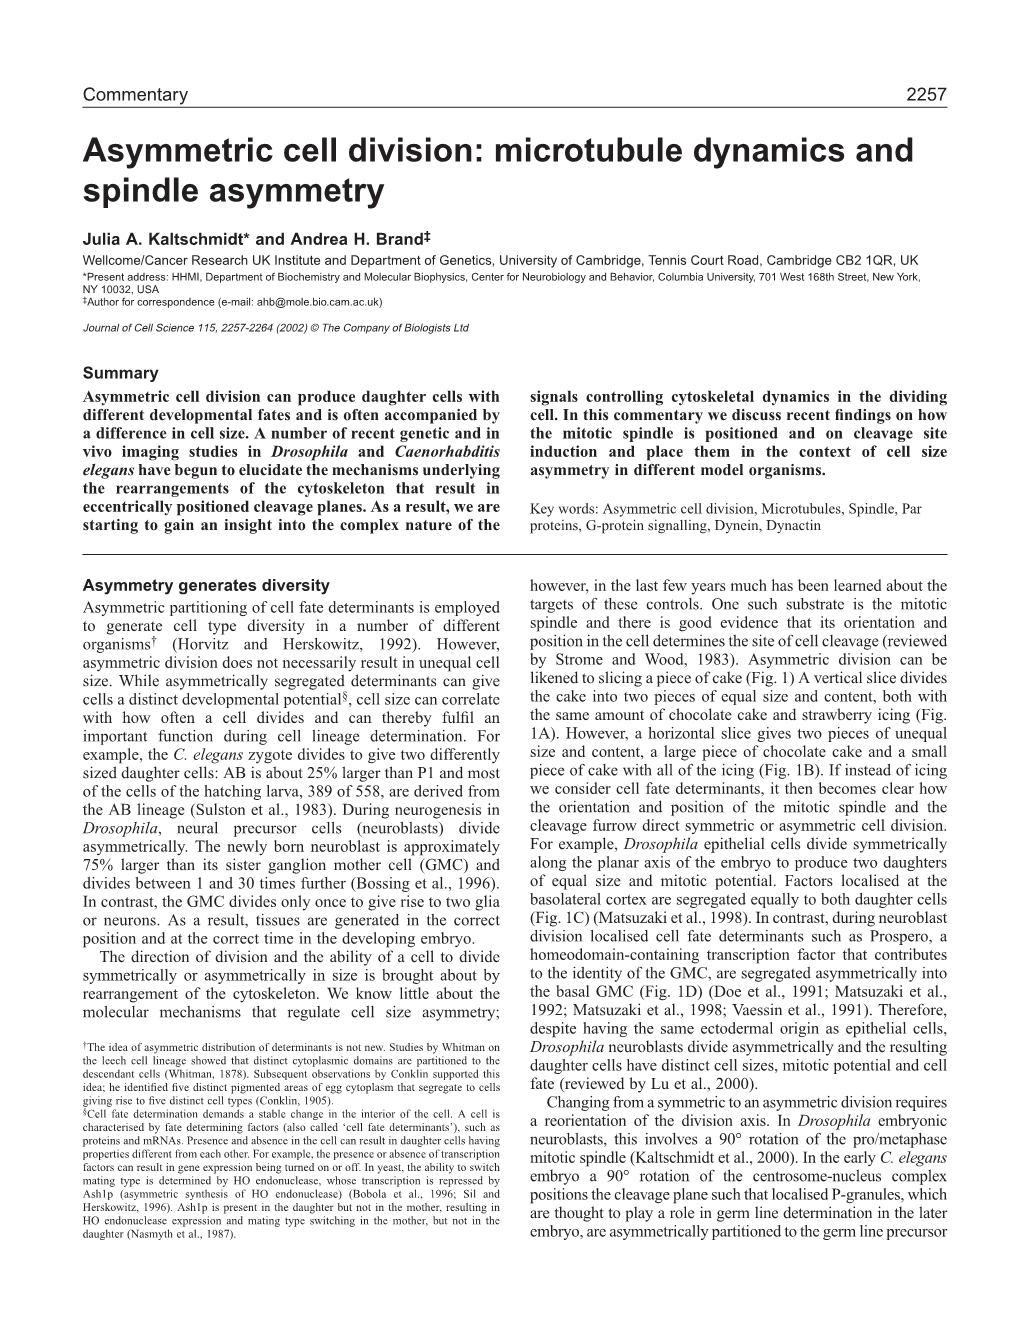 Asymmetric Cell Division: Microtubule Dynamics and Spindle Asymmetry